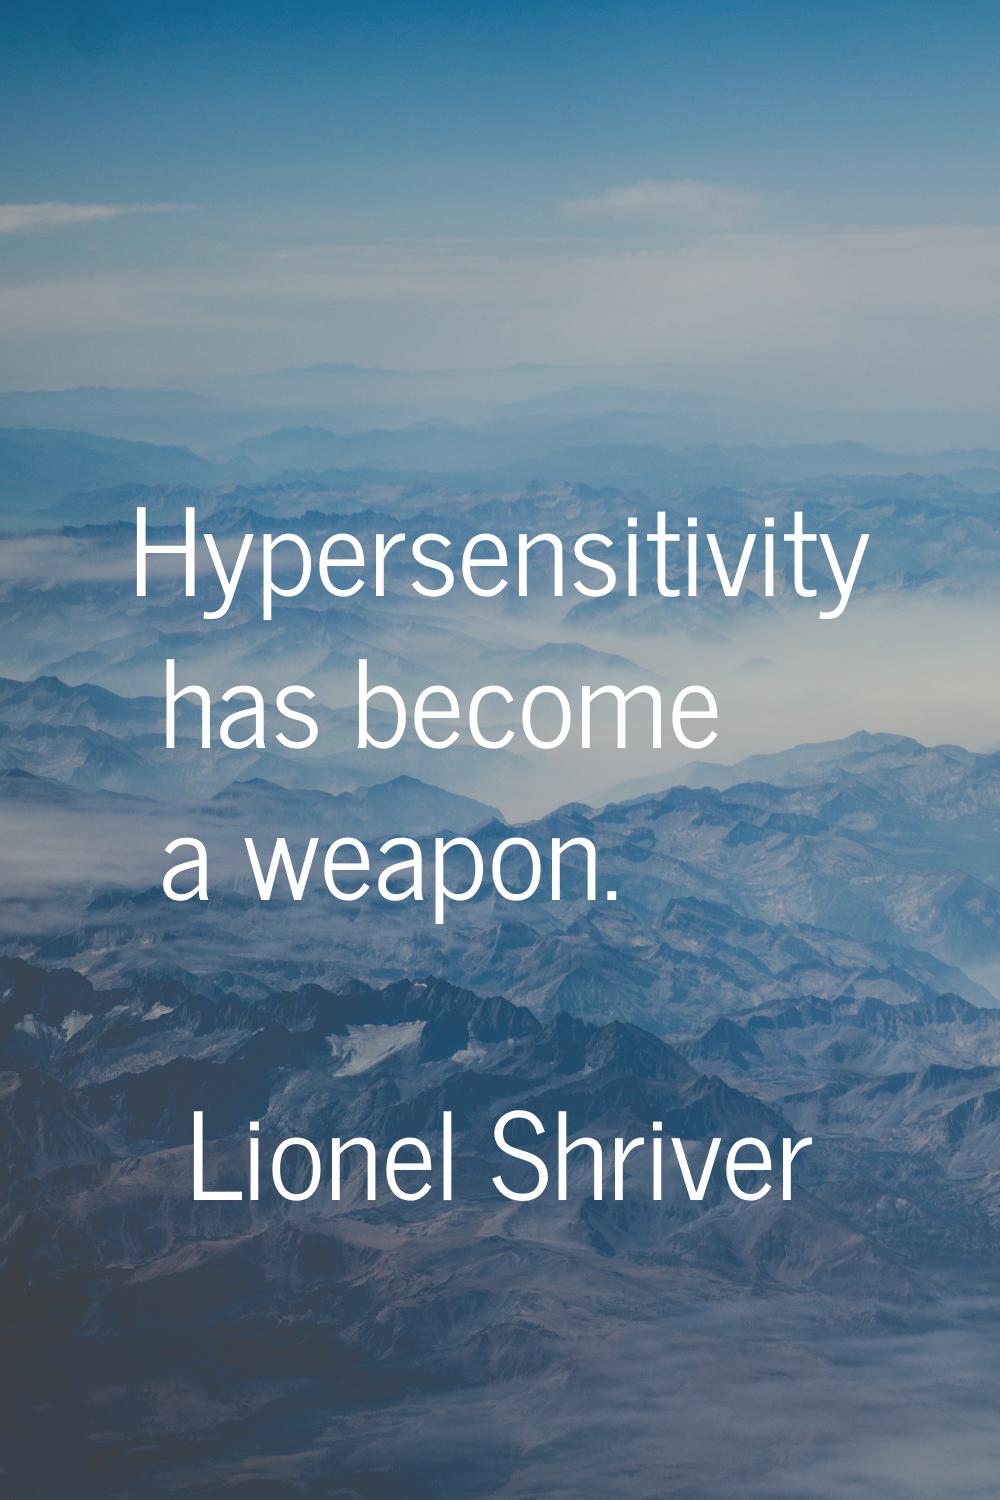 Hypersensitivity has become a weapon.